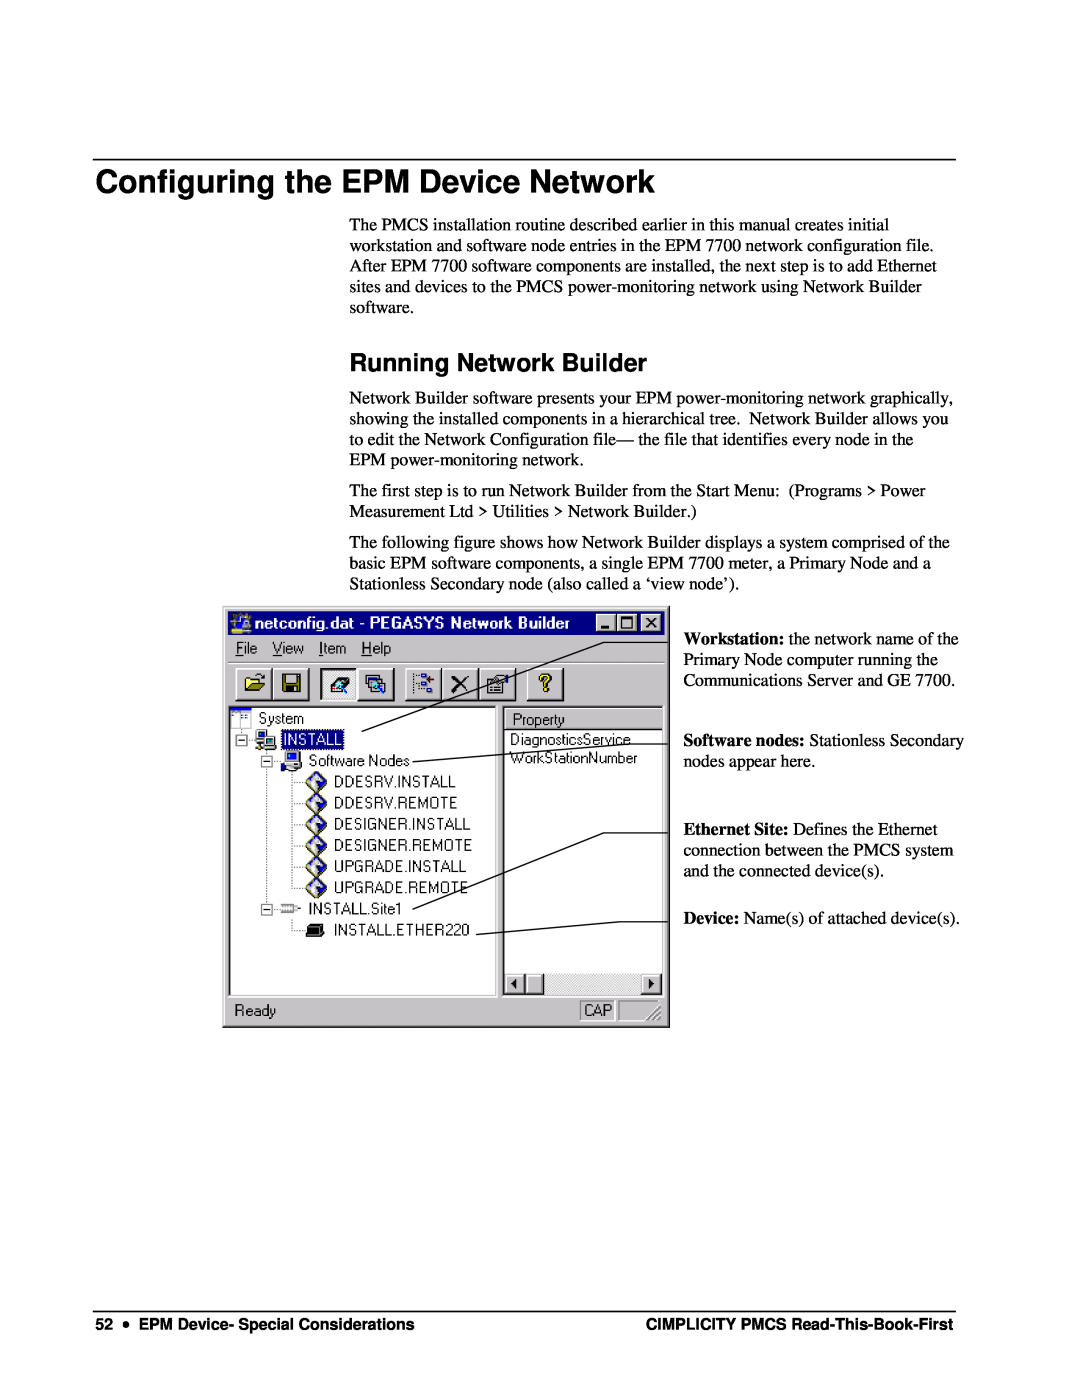 GE DEH-211 manual Configuring the EPM Device Network, Running Network Builder 